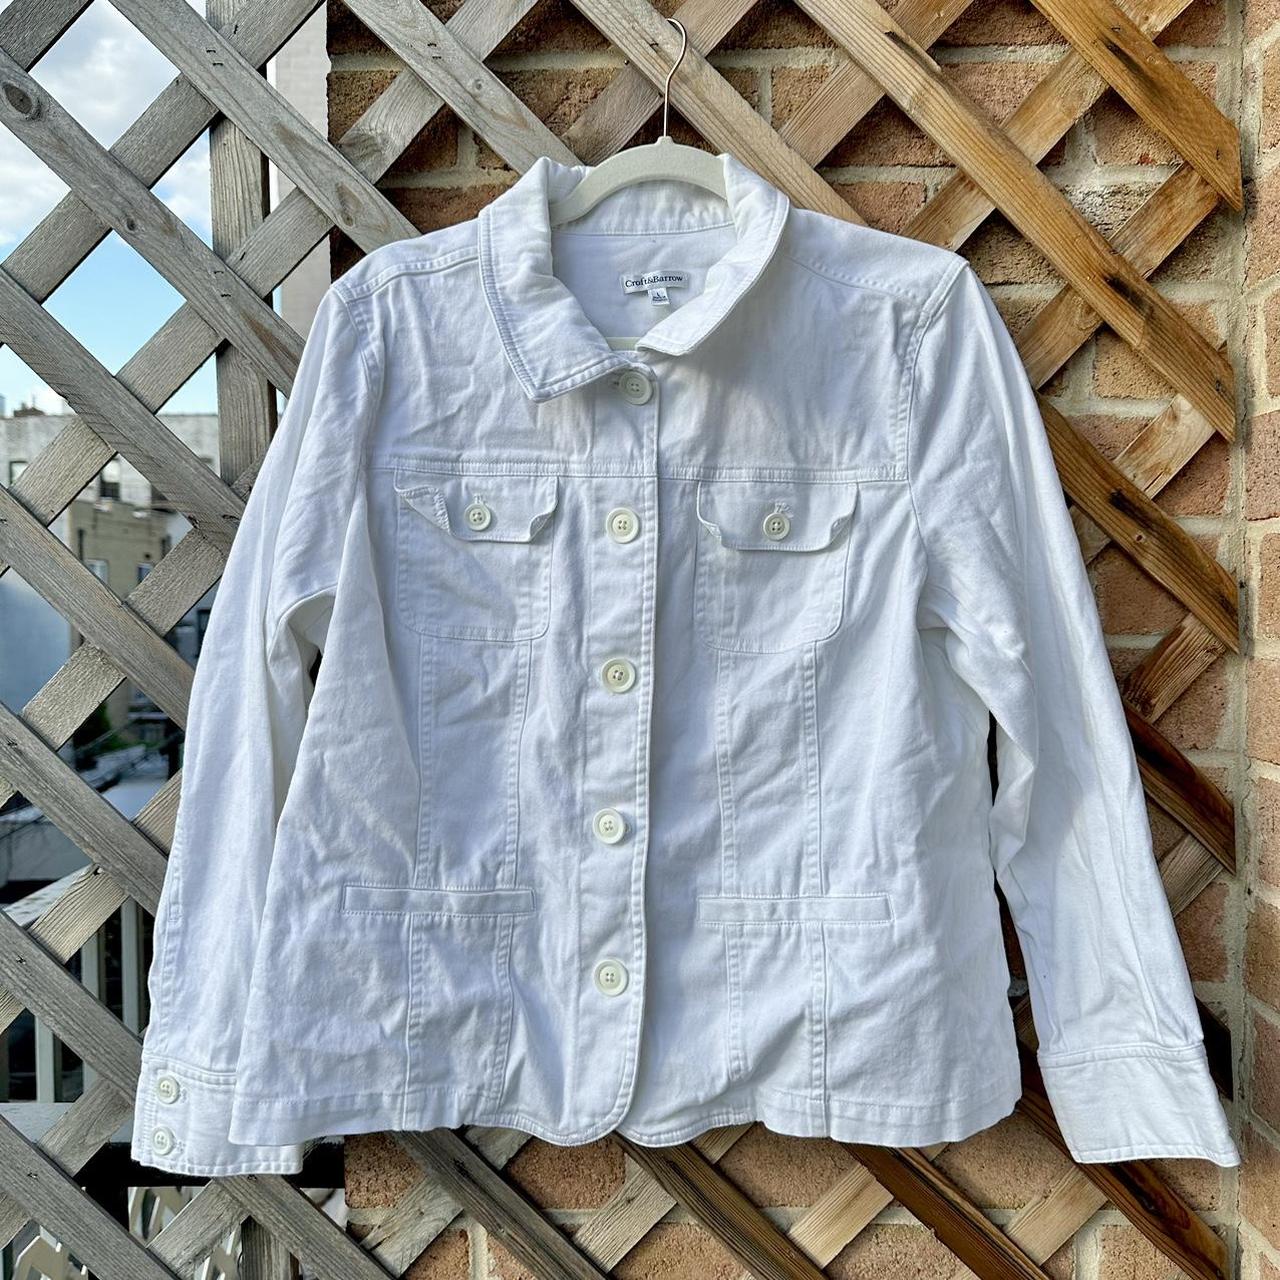 white croft and barrow cotton spring jacket in good... - Depop